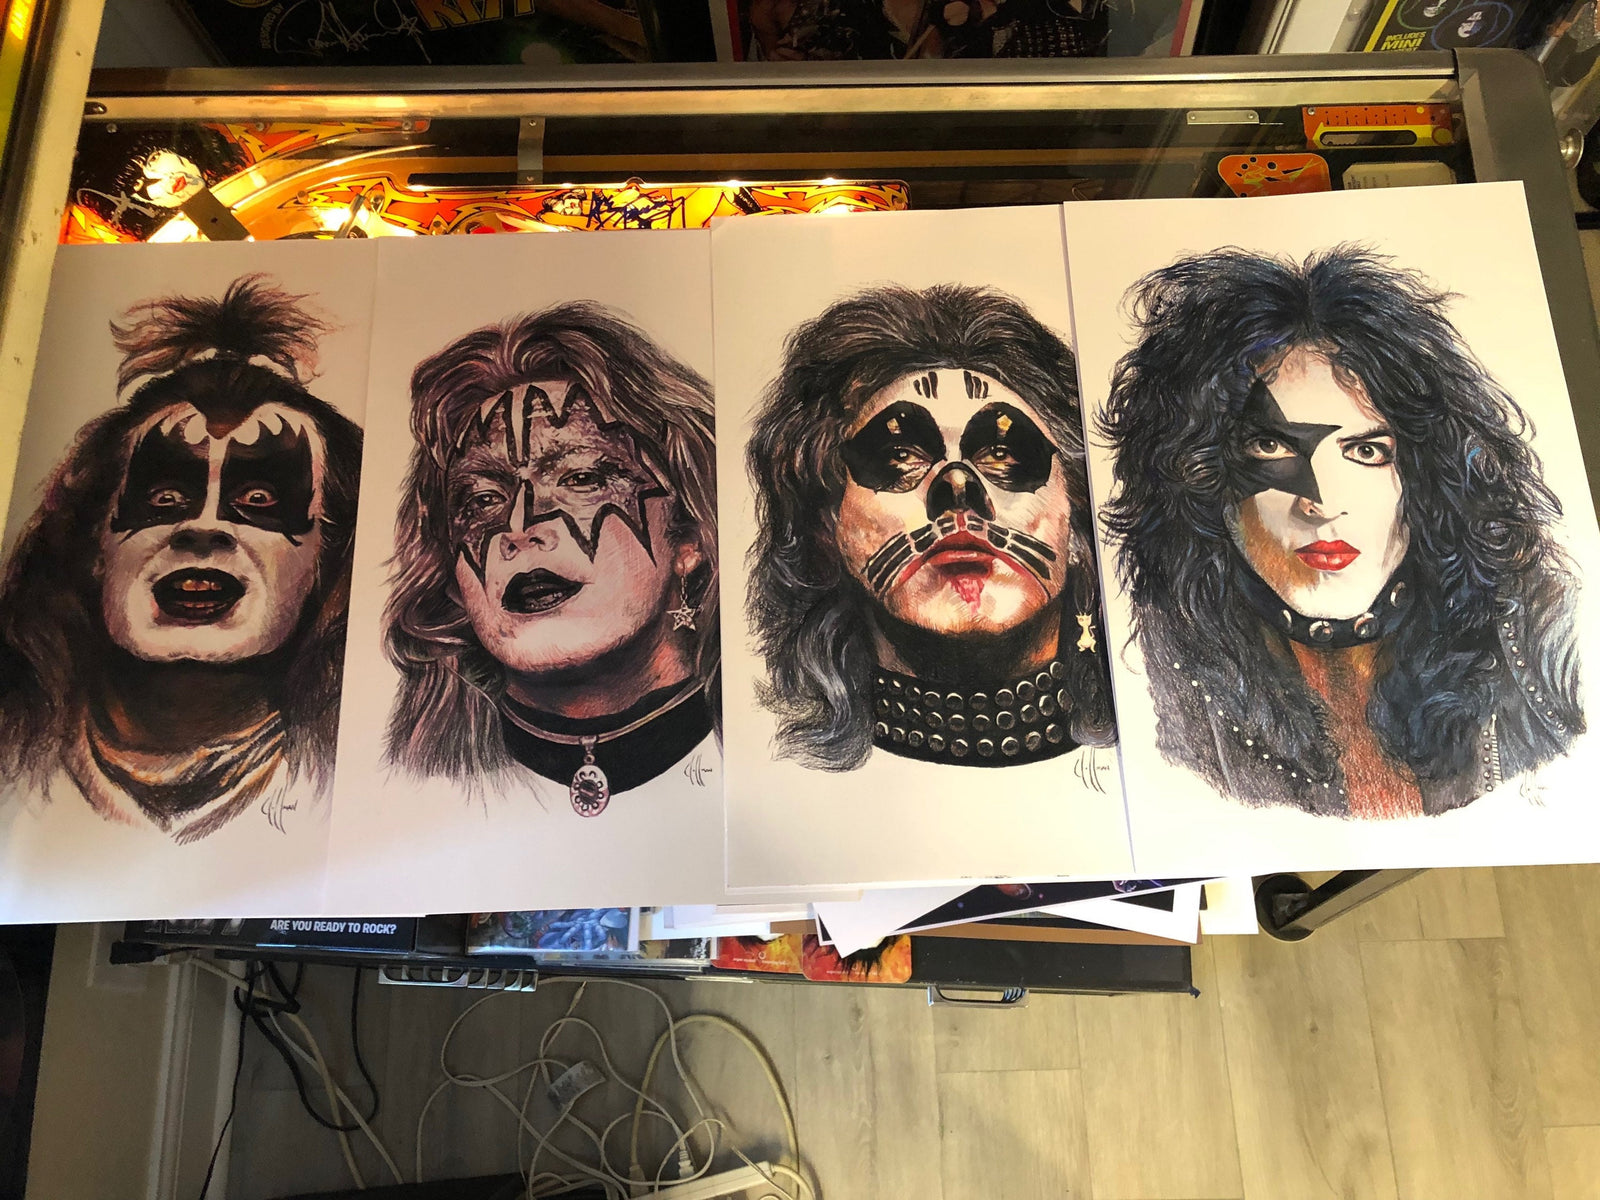 Limited Edition Debut Series Kiss Founding Member in 1974 Erra Signed Prints